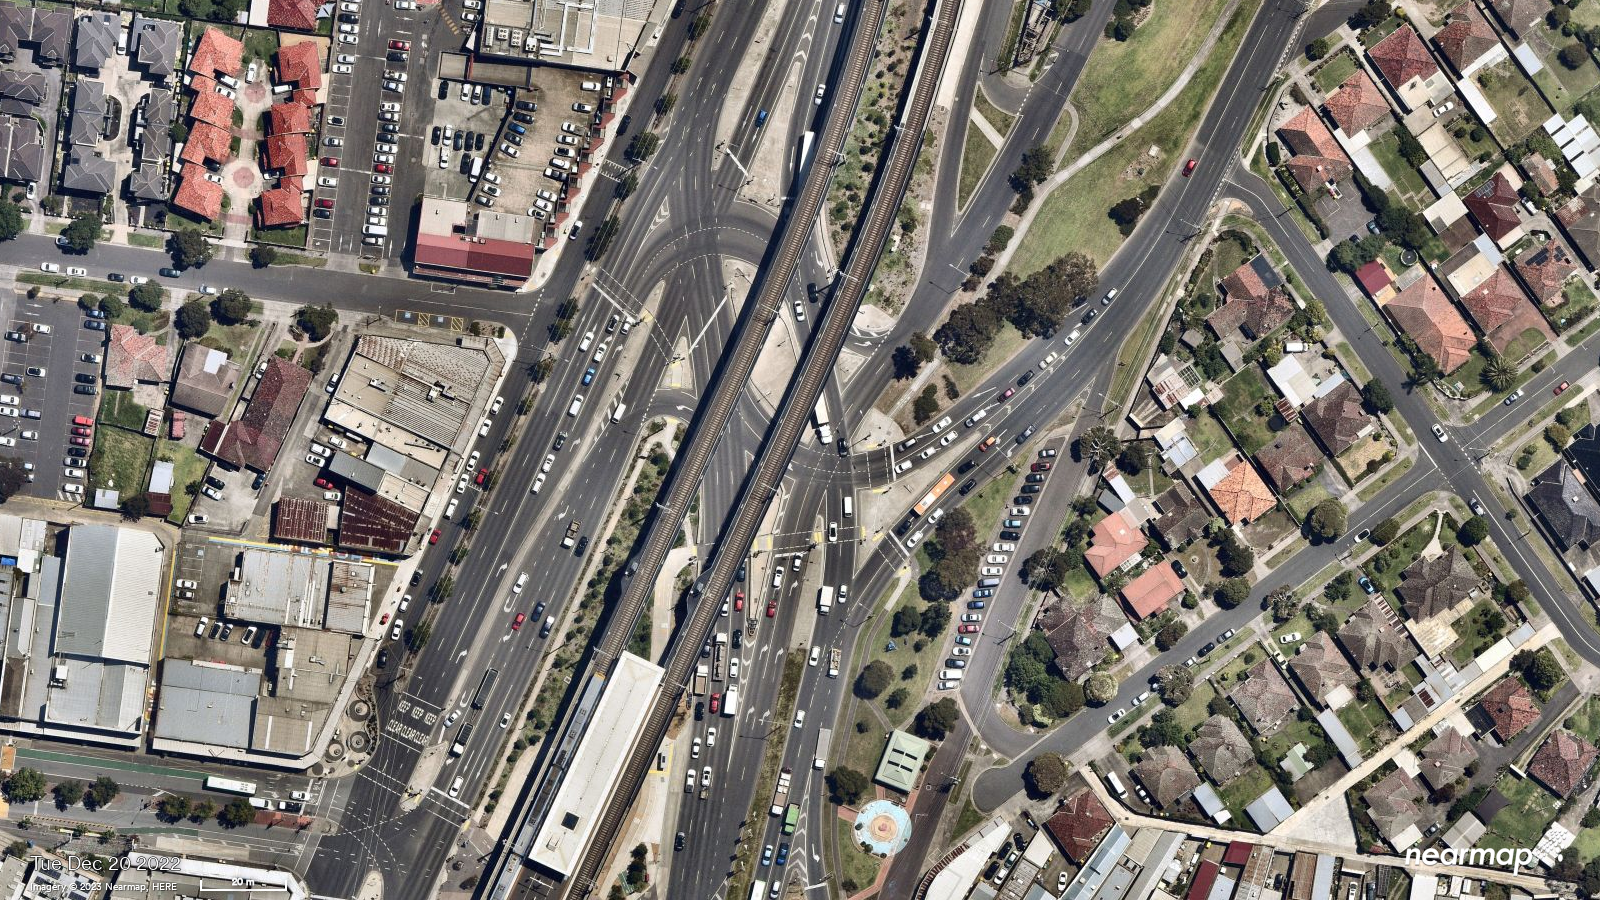 Vertical aerial photo of the current road intersection layout around Reservoir railway station